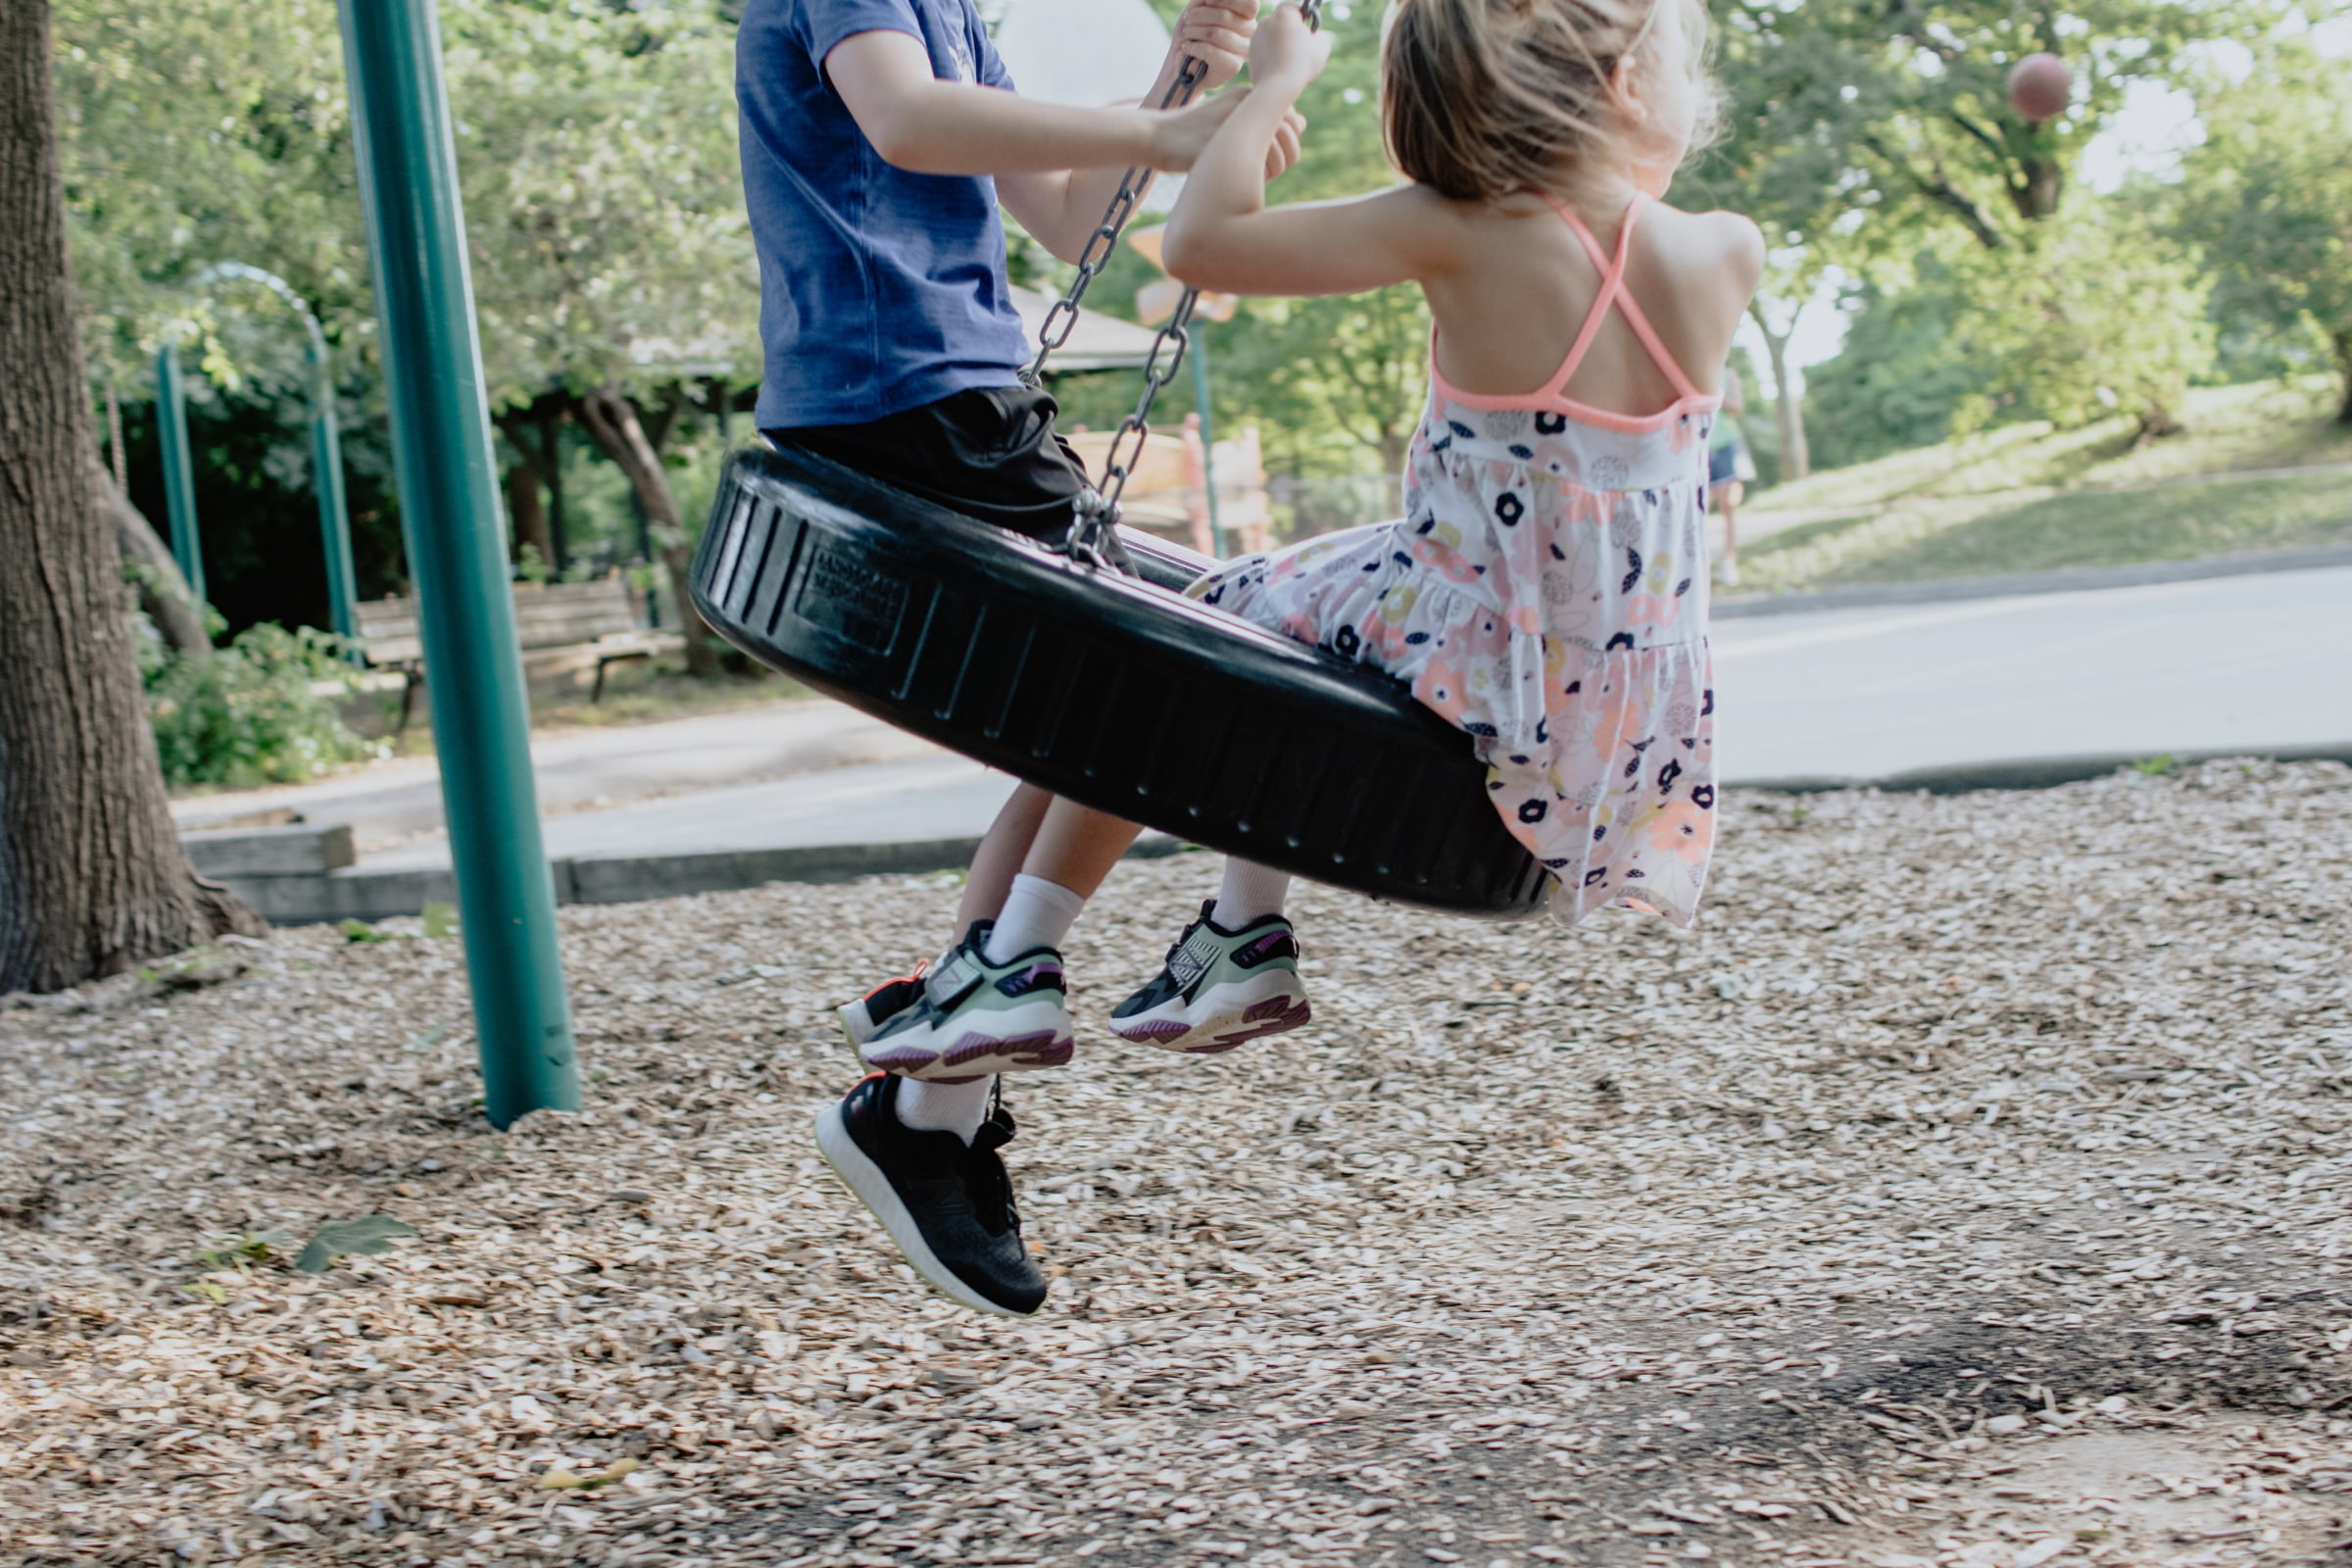 Two children on a swing in a playground